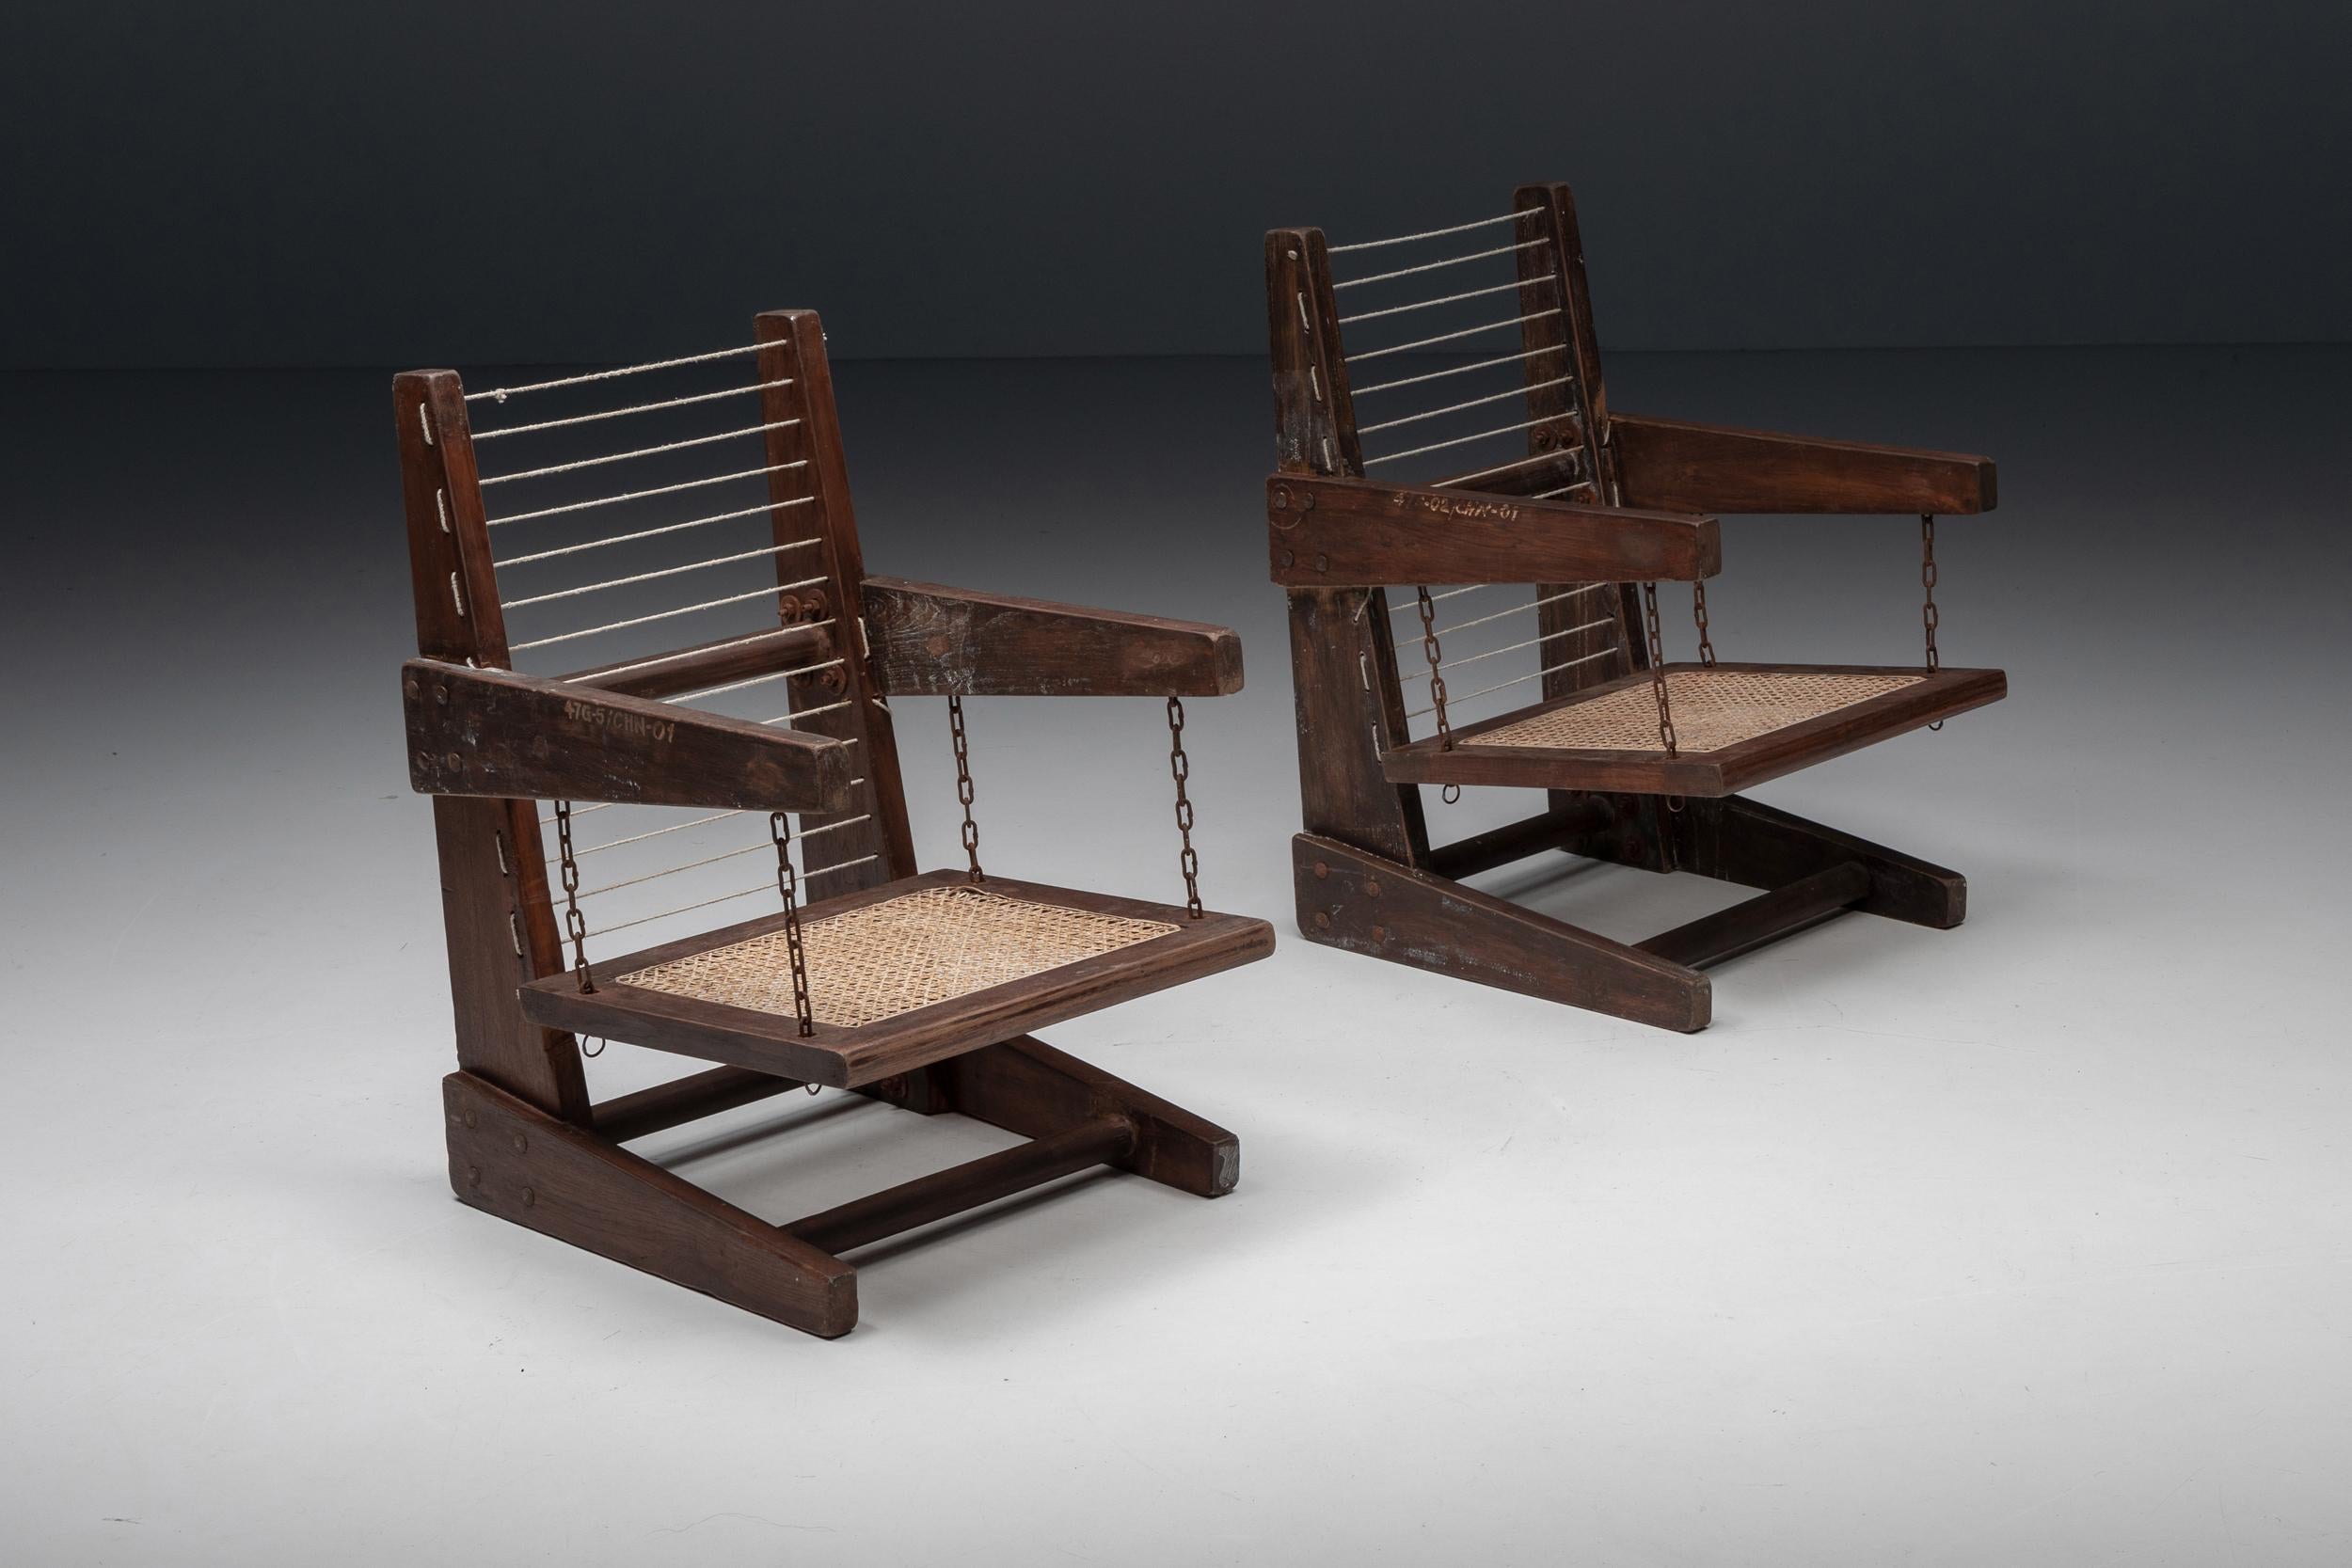 Pierre Jeanneret Demountable PJ-010615 hanging armchair, Chandigarh, 1953

Rare and important Pierre Jeanneret Model PJ-010615 armchairs also known as ‘Demountable Knock Down Chair’ made in Chandigarh, India in circa 1953-54. These extremely rare